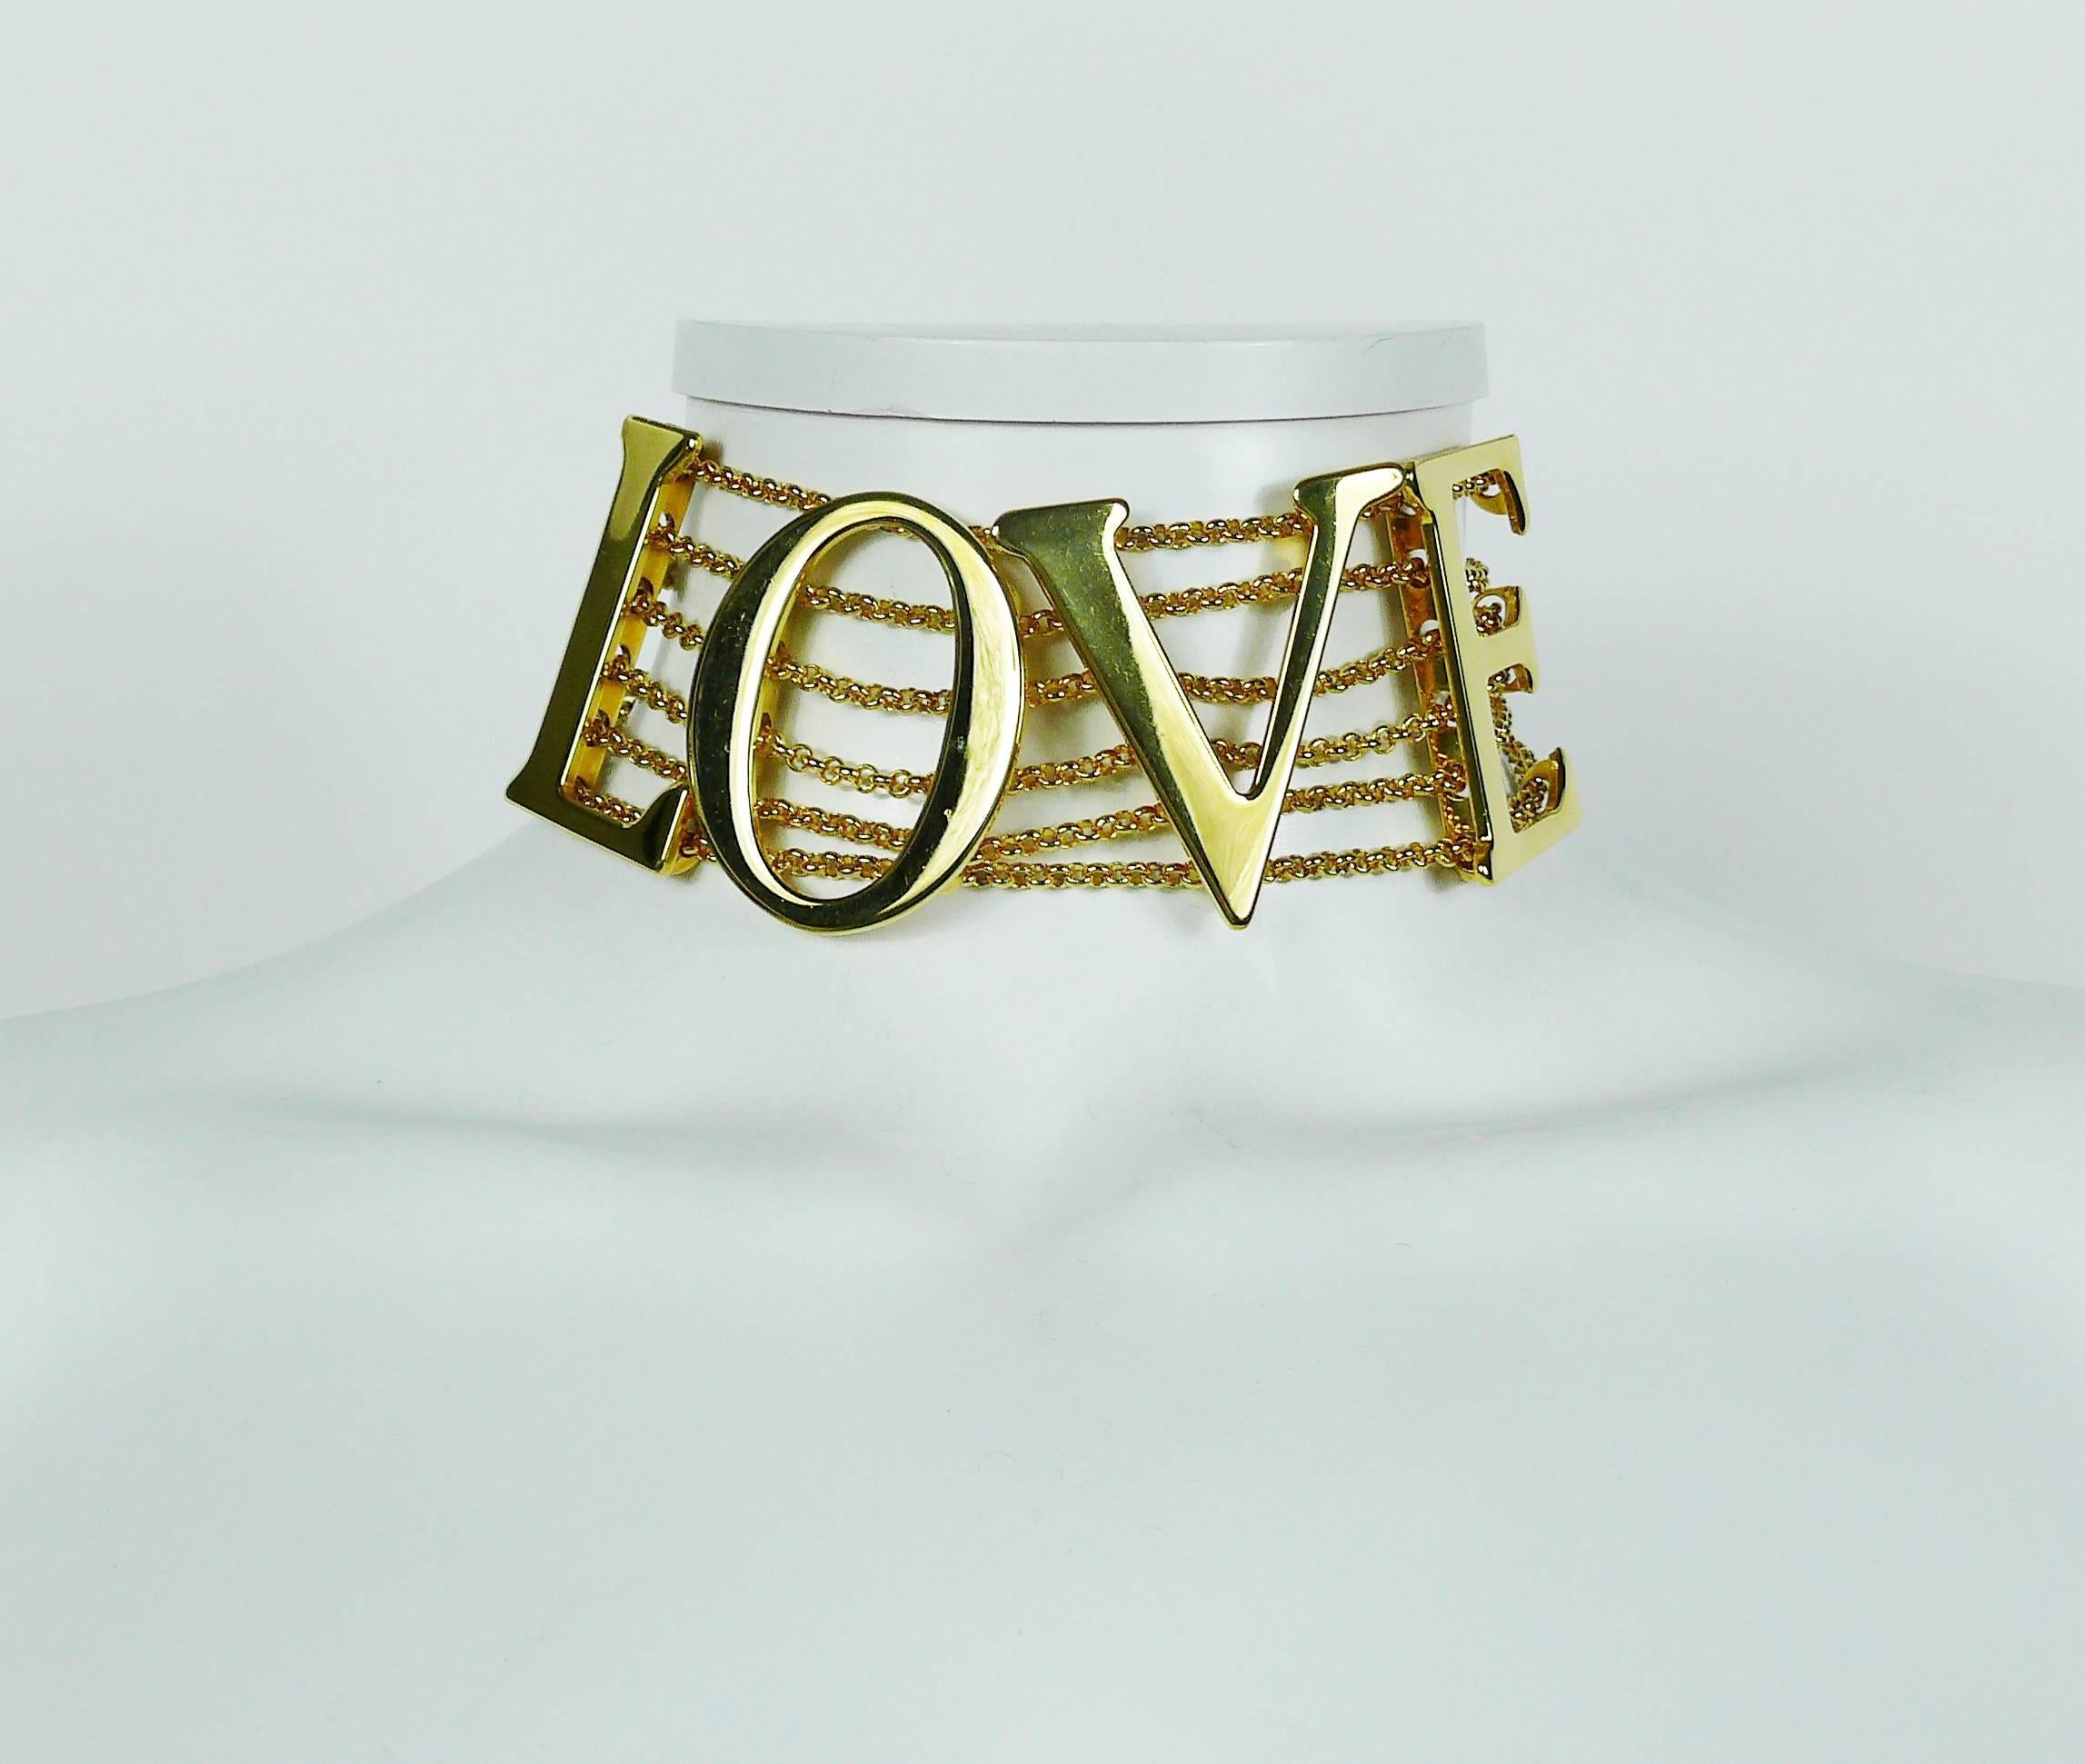 DOLCE & GABBANA iconic gold toned runway choker necklace featuring large LOVE characters attached on six chains.

Spring/Summer Ready-to-Wear 2003 "LOVE SEX" Collection.
Similar model worn by NATALIA VODIANOVA on the catwalk.

The LOVE